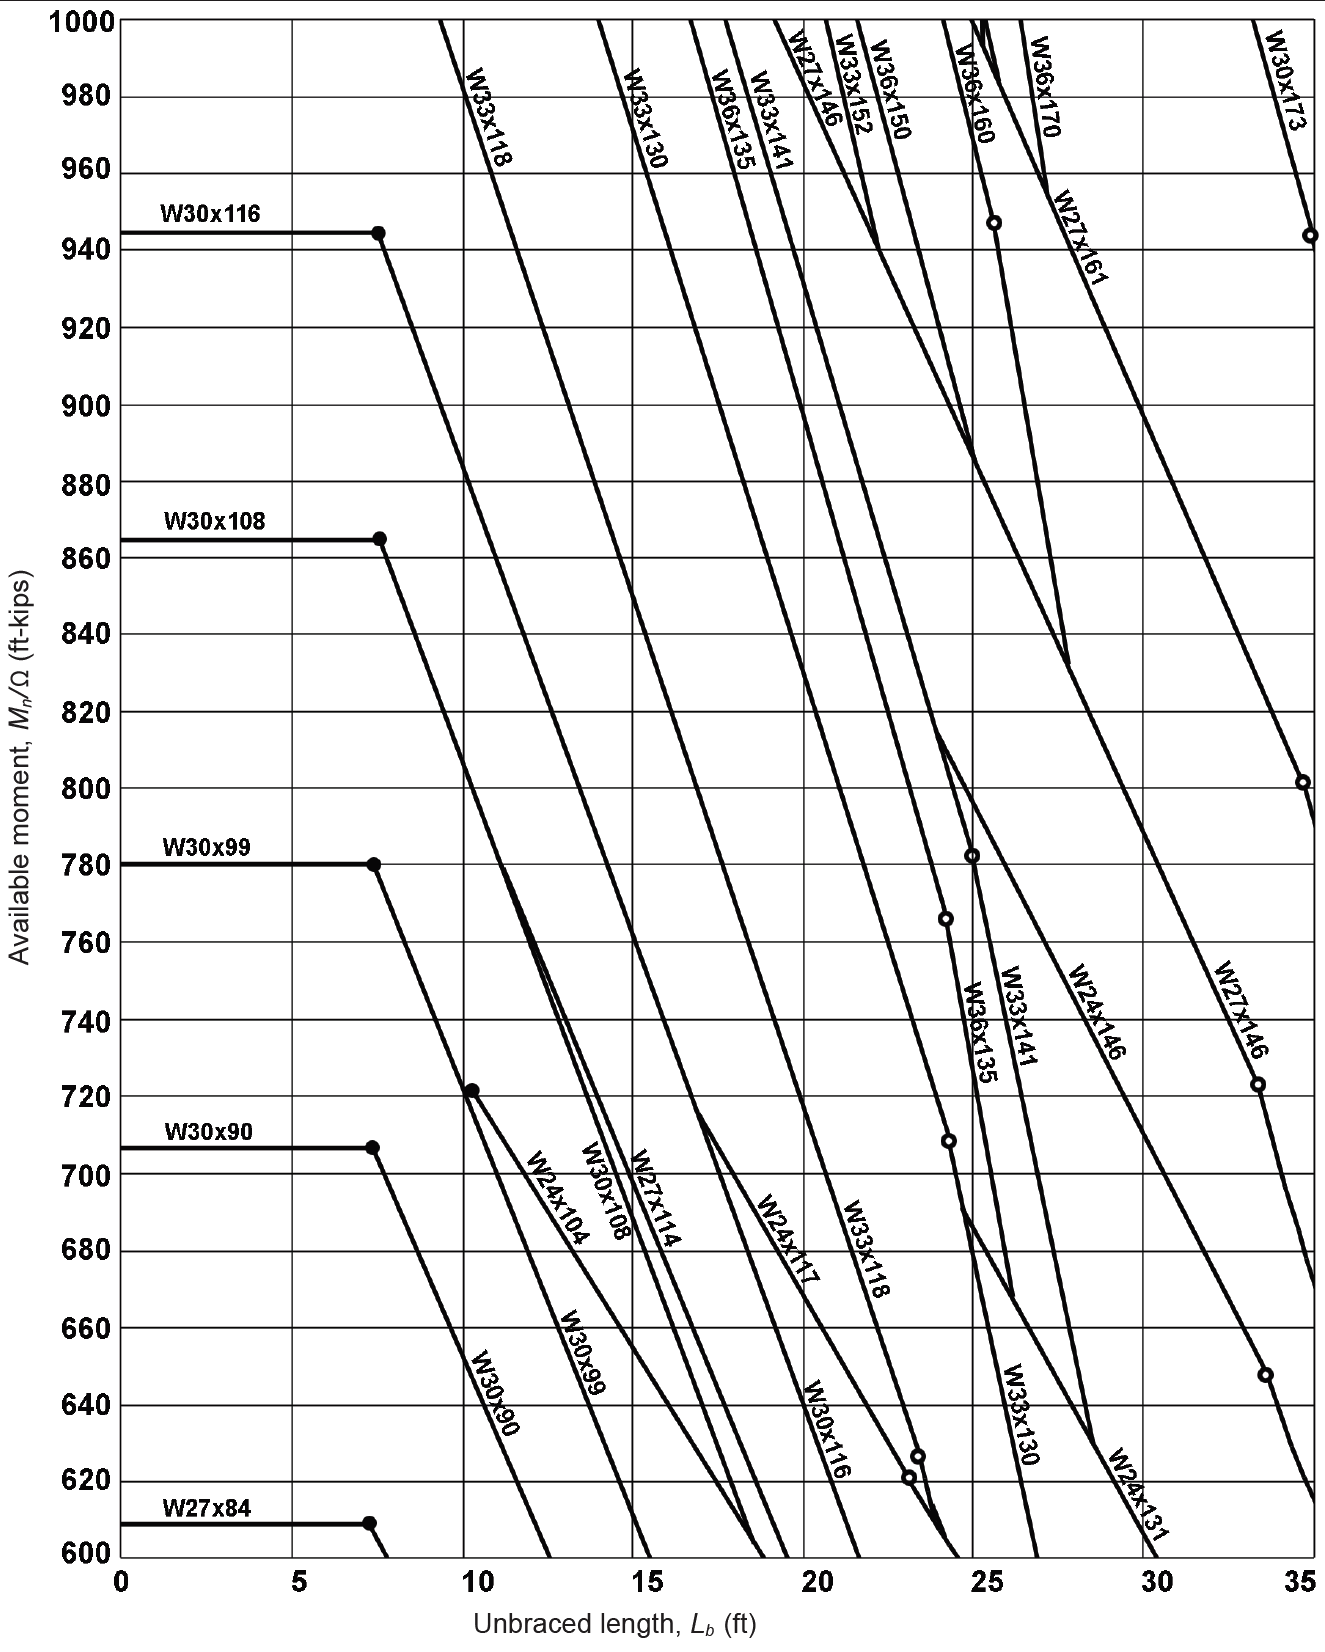 graph showing available moments for wide-flange shapes